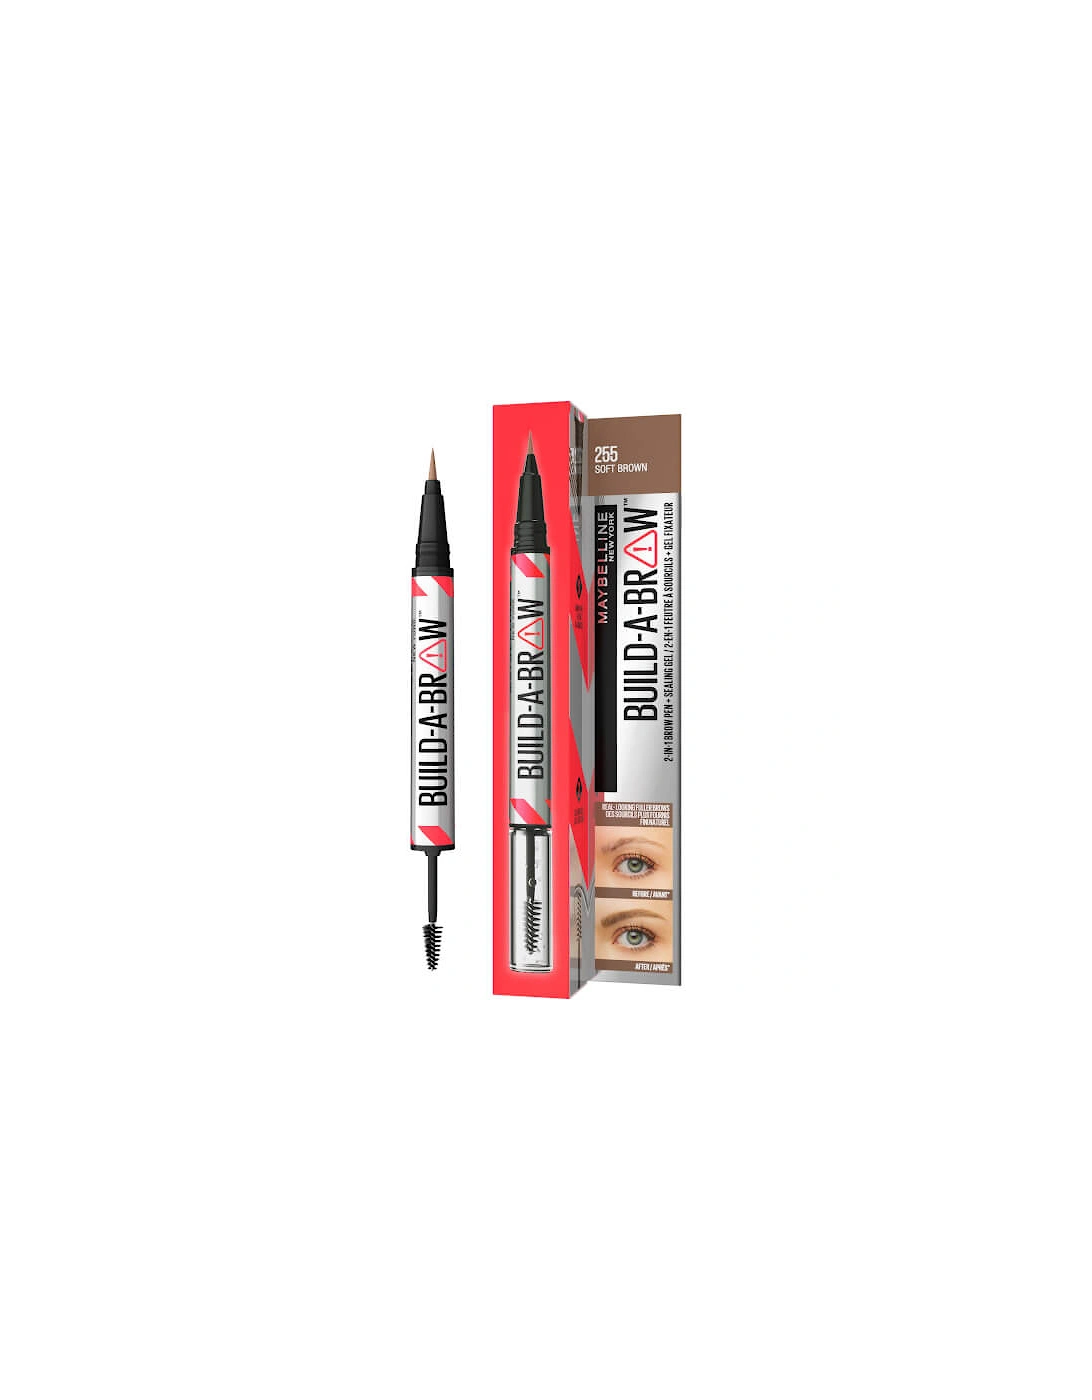 Build-A-Brow 2 Easy Steps Eye Brow Pencil and Gel - Soft Brown, 2 of 1